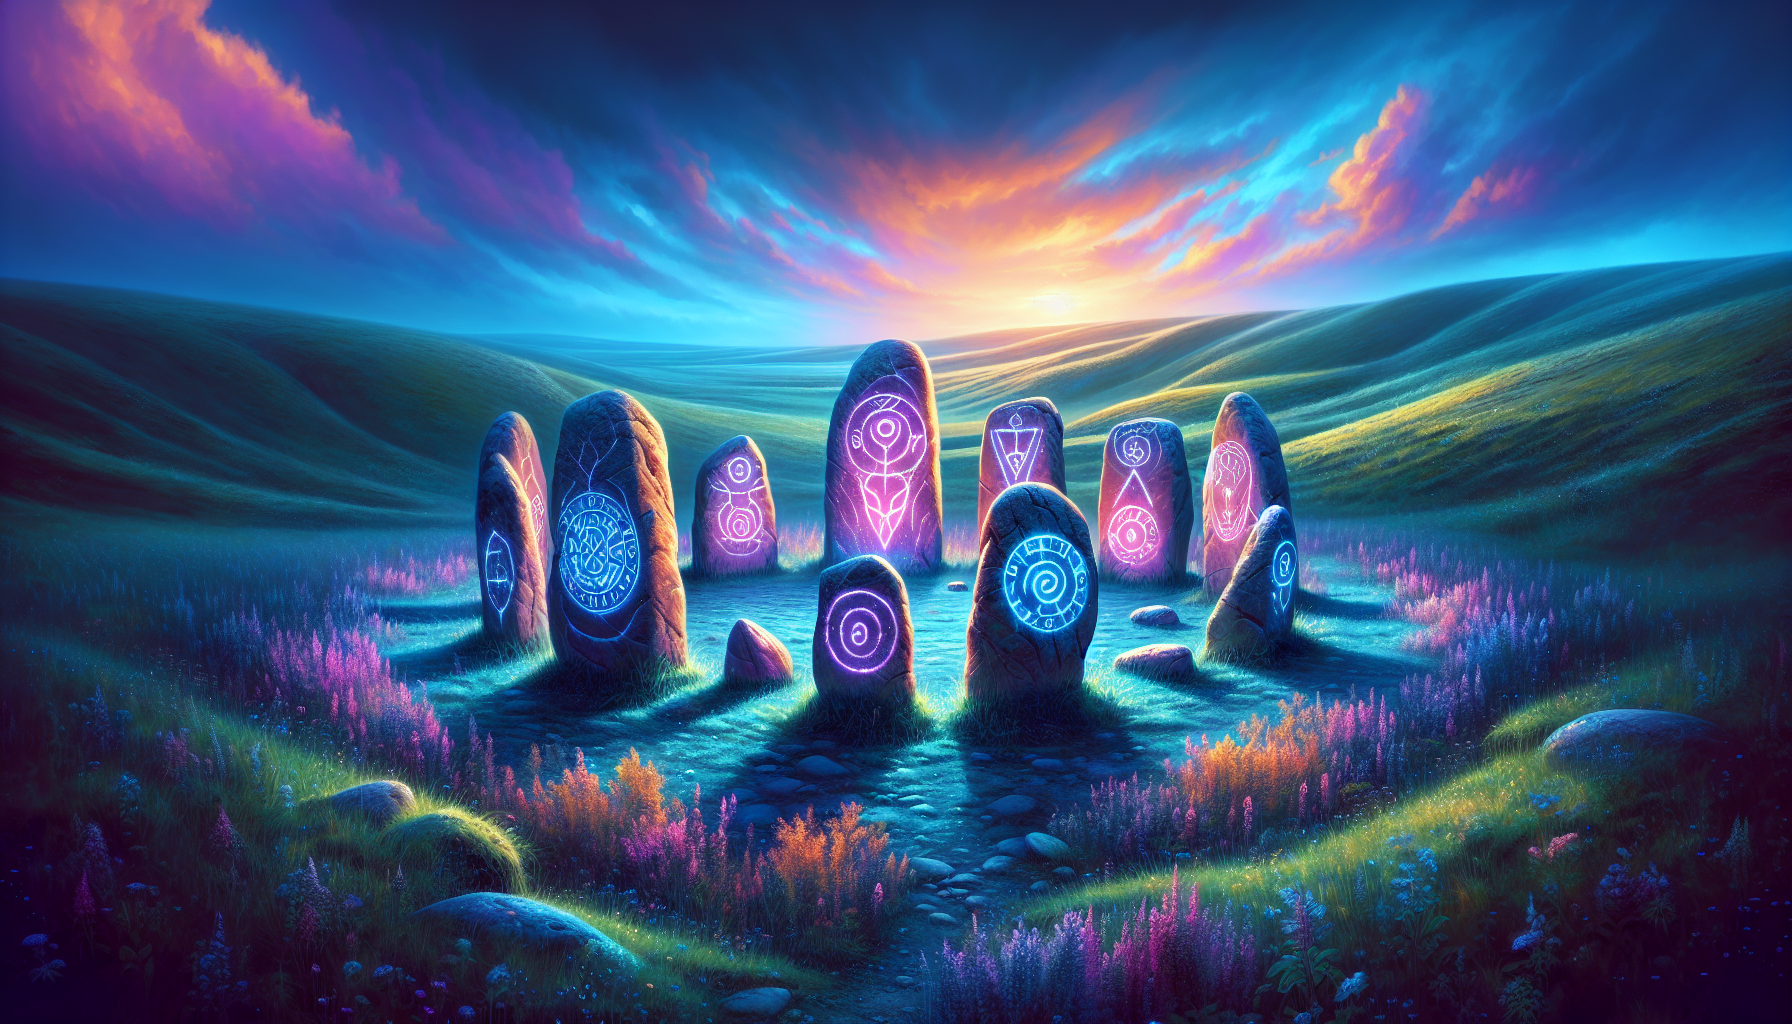 Create an image of ancient stones arranged in a mystical, circular formation, exuding a magical aura under a twilight sky. The stones appear sentient, with glowing, rune-like symbols and subtle facial